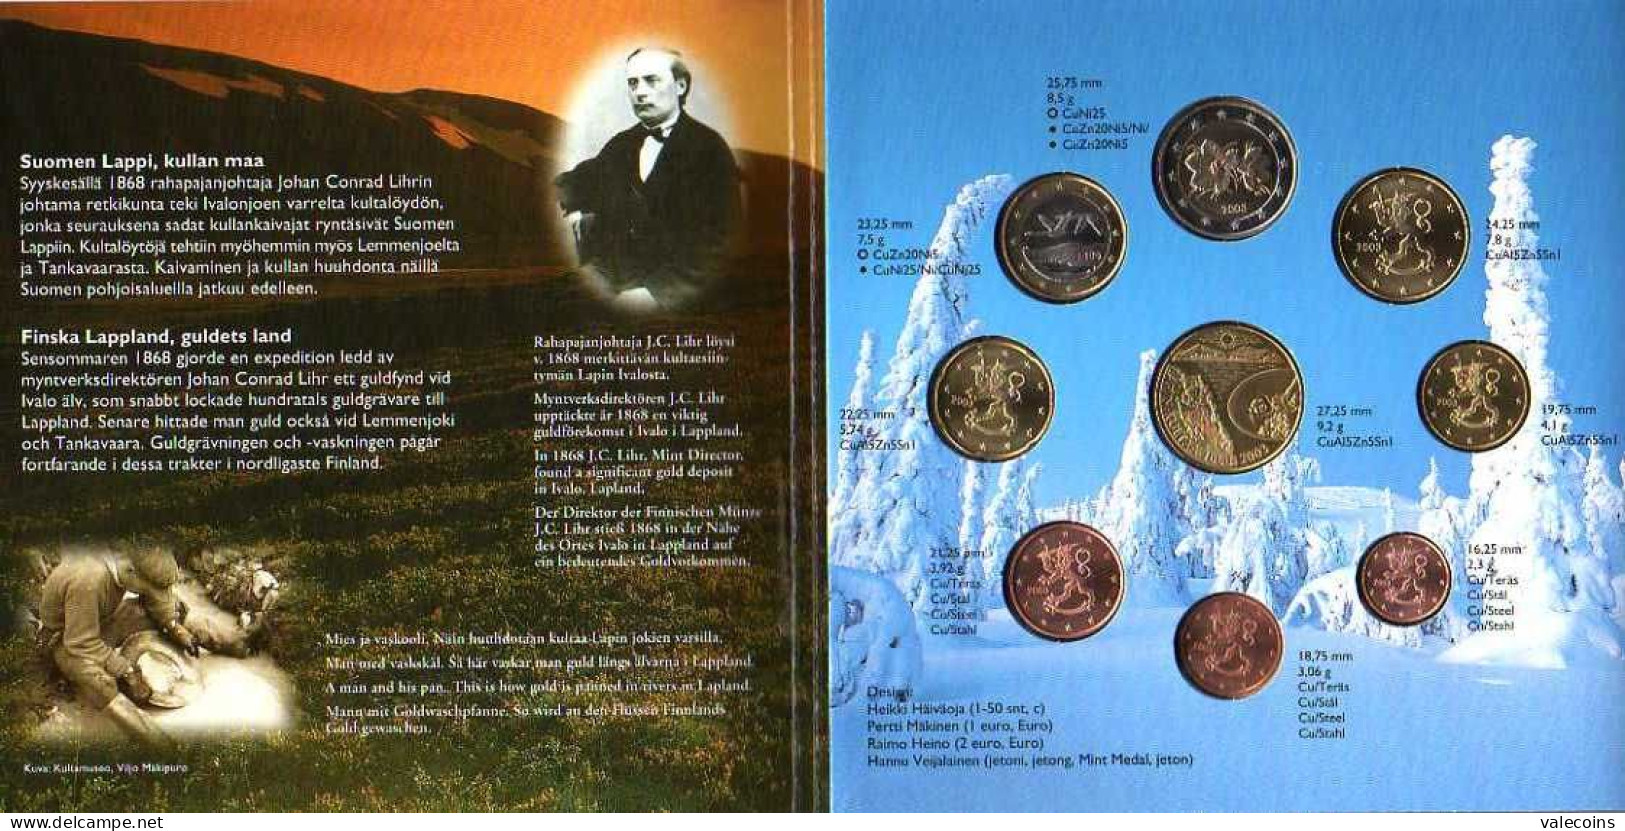 FINLANDIA SUOMI FINLAND FINNLAND - 8 COINS - KMS OFFICIAL ISSUE 2003 YEAR SET - LIMITED ISSUE - Finlandia